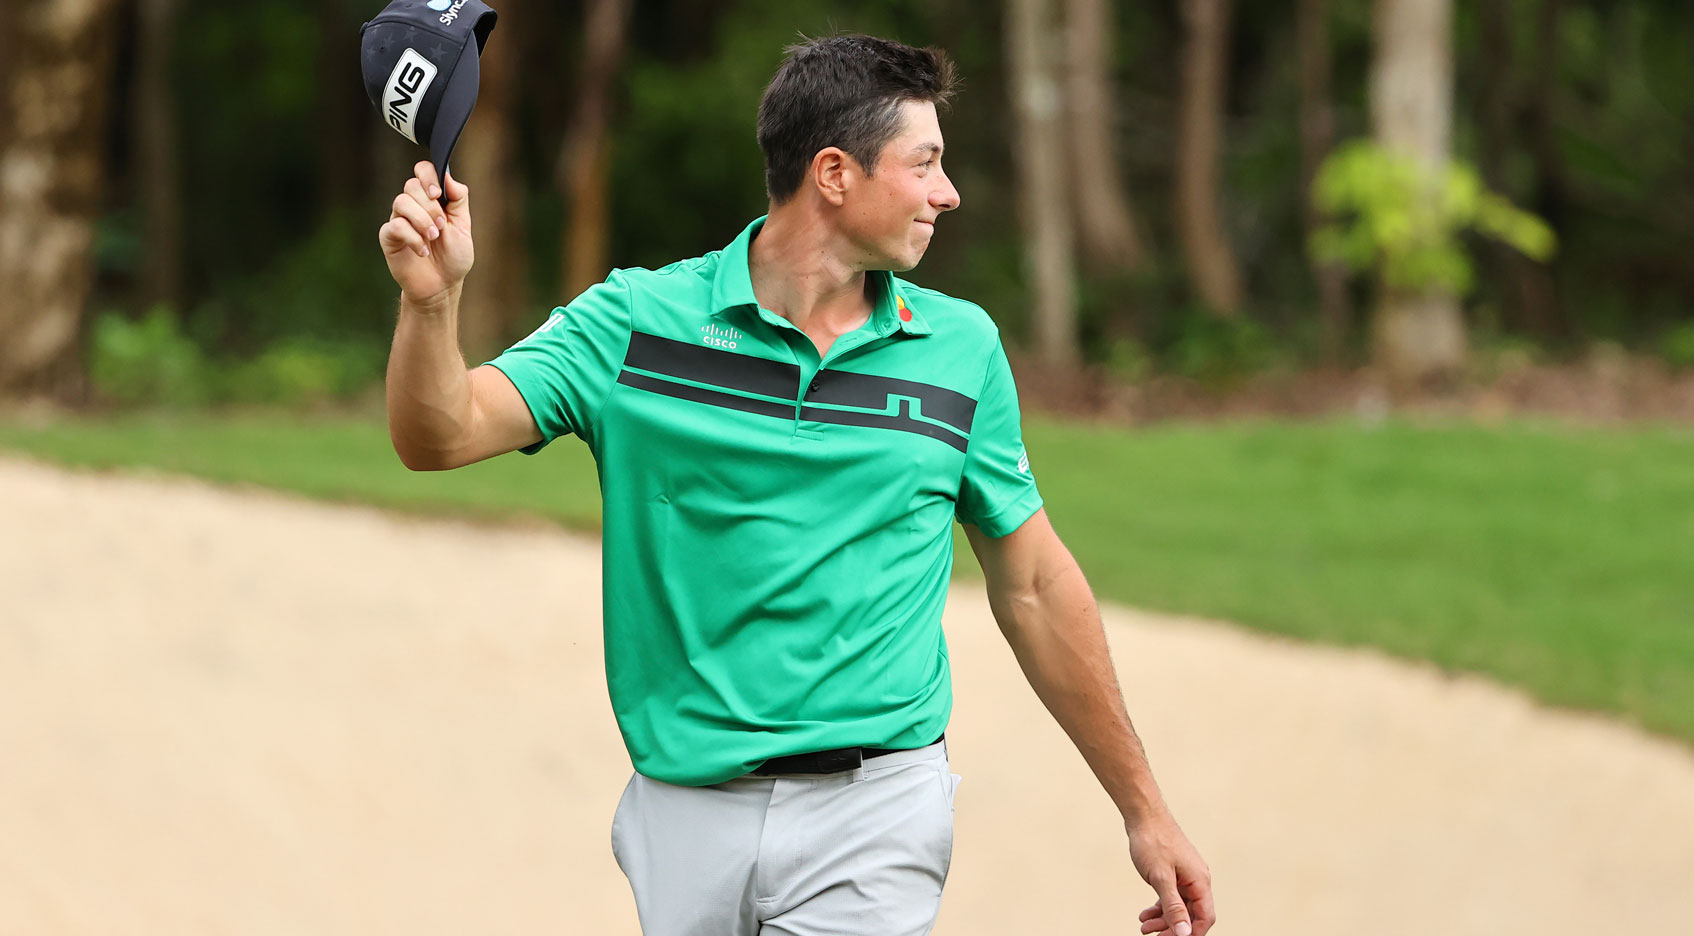 Five things from the Mayakoba Golf Classic presented by UNIFIN